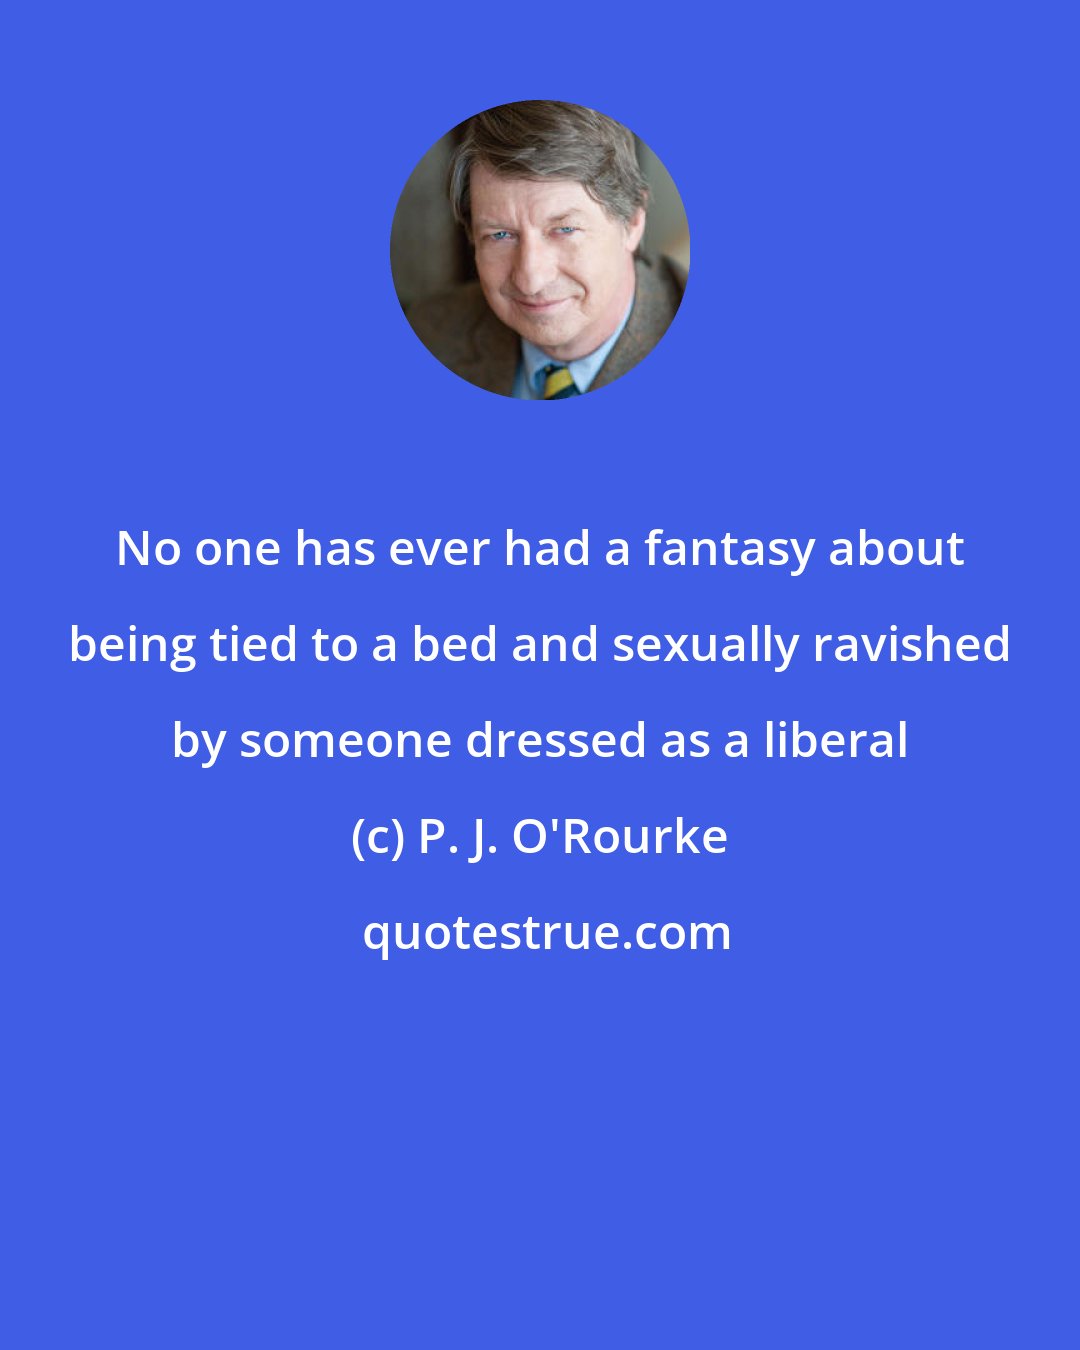 P. J. O'Rourke: No one has ever had a fantasy about being tied to a bed and sexually ravished by someone dressed as a liberal